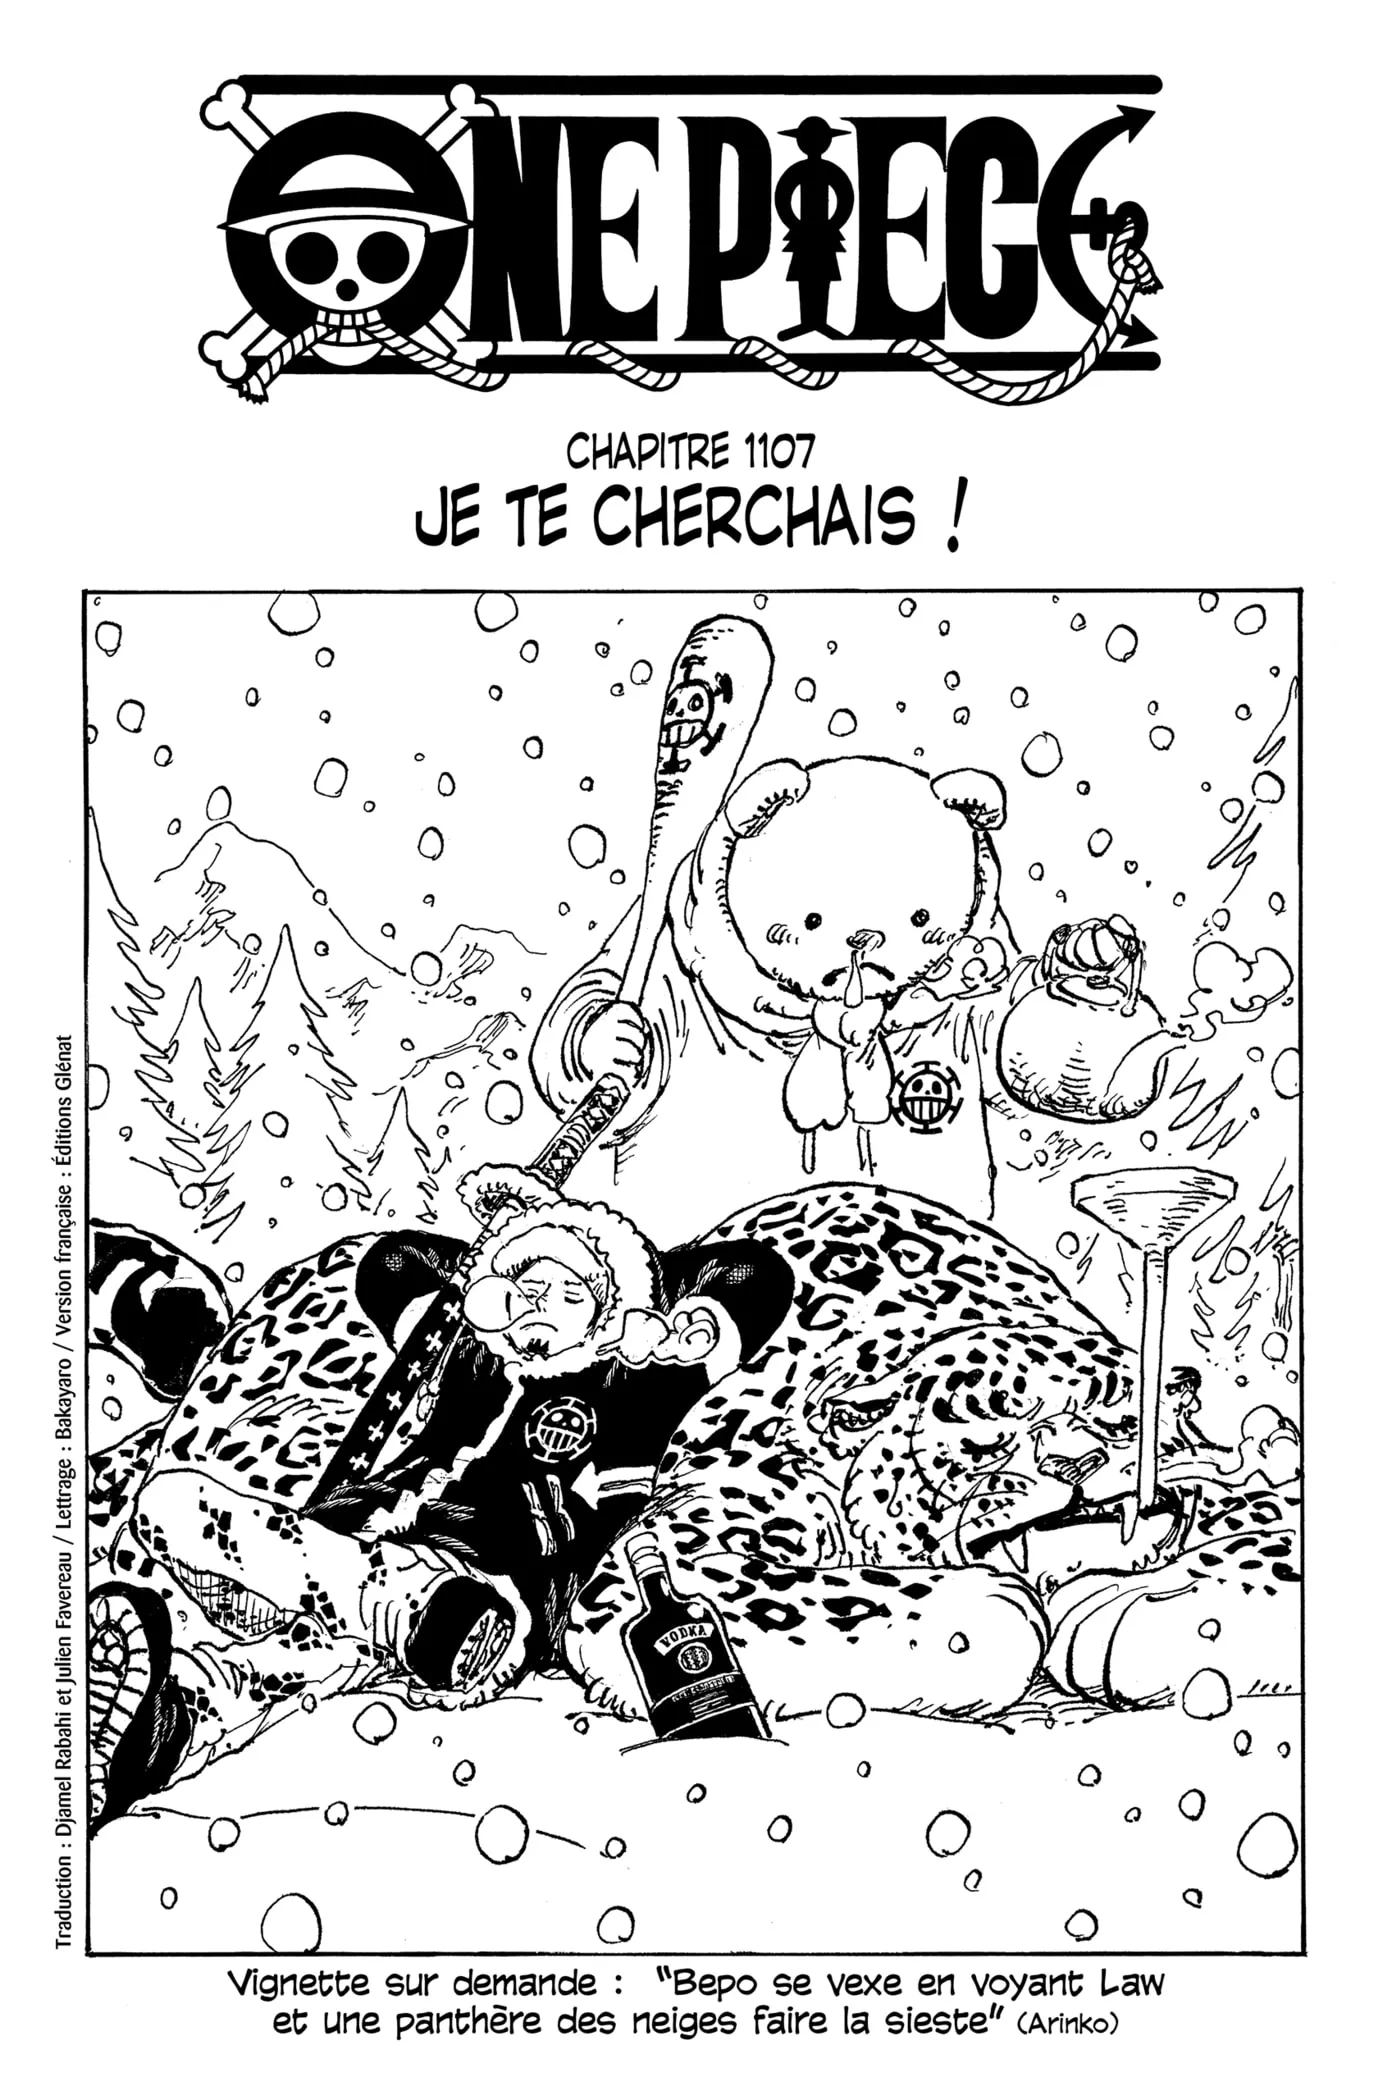 One Piece: Chapter chapitre-1107 - Page 1